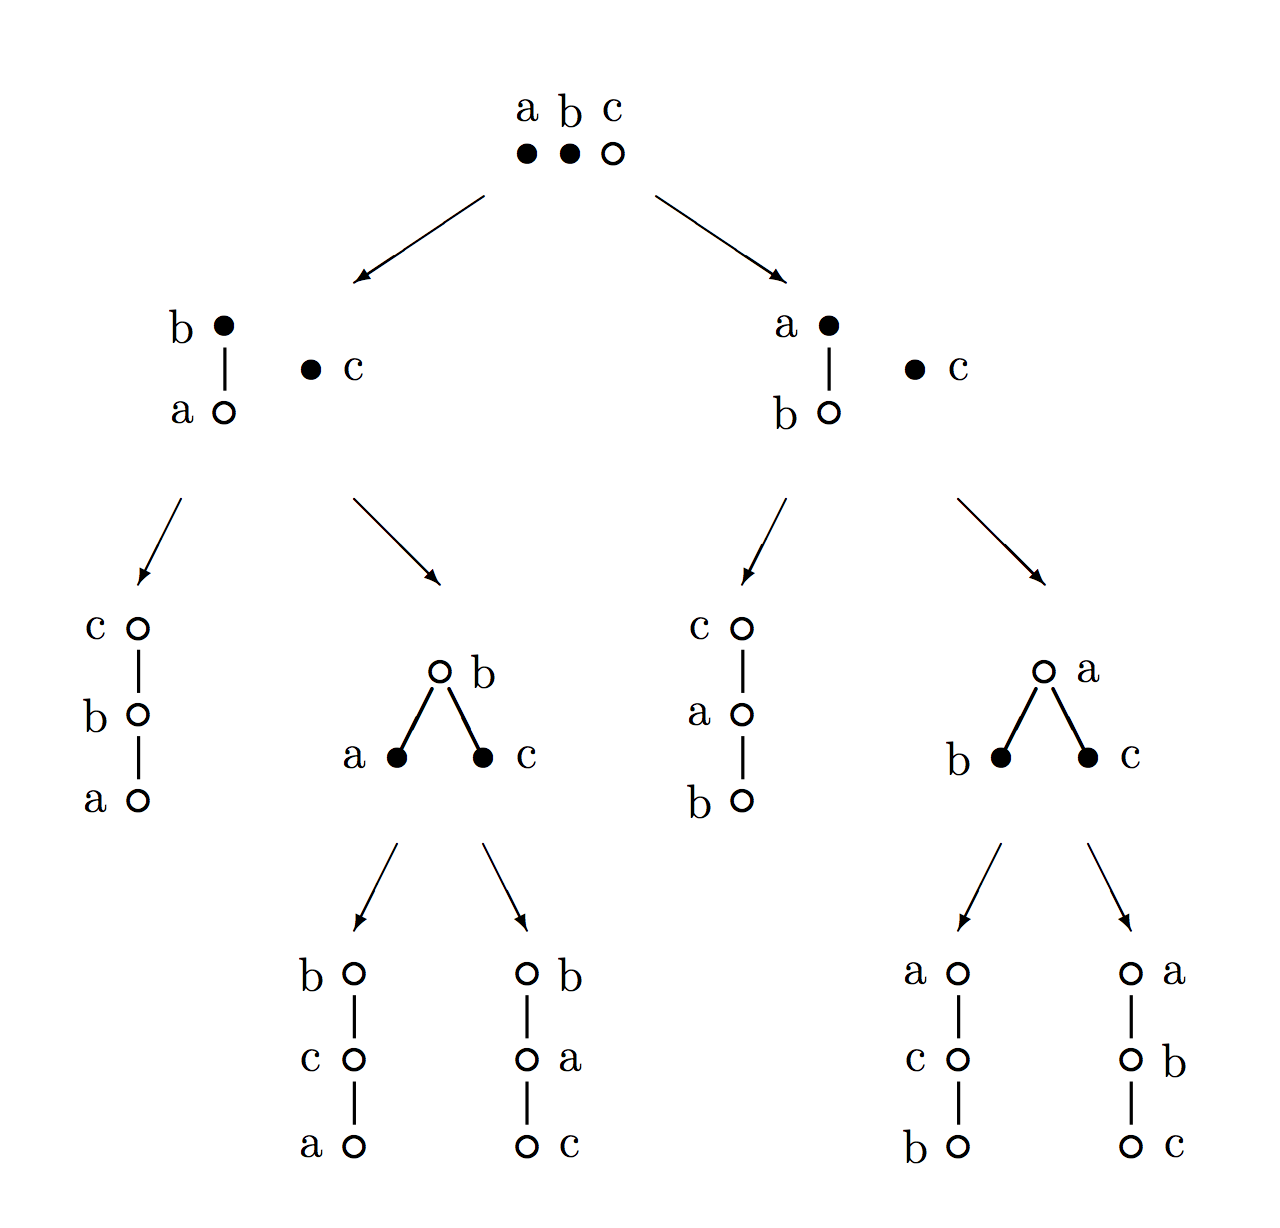 Example of a uncollapsed Hasse Diagram